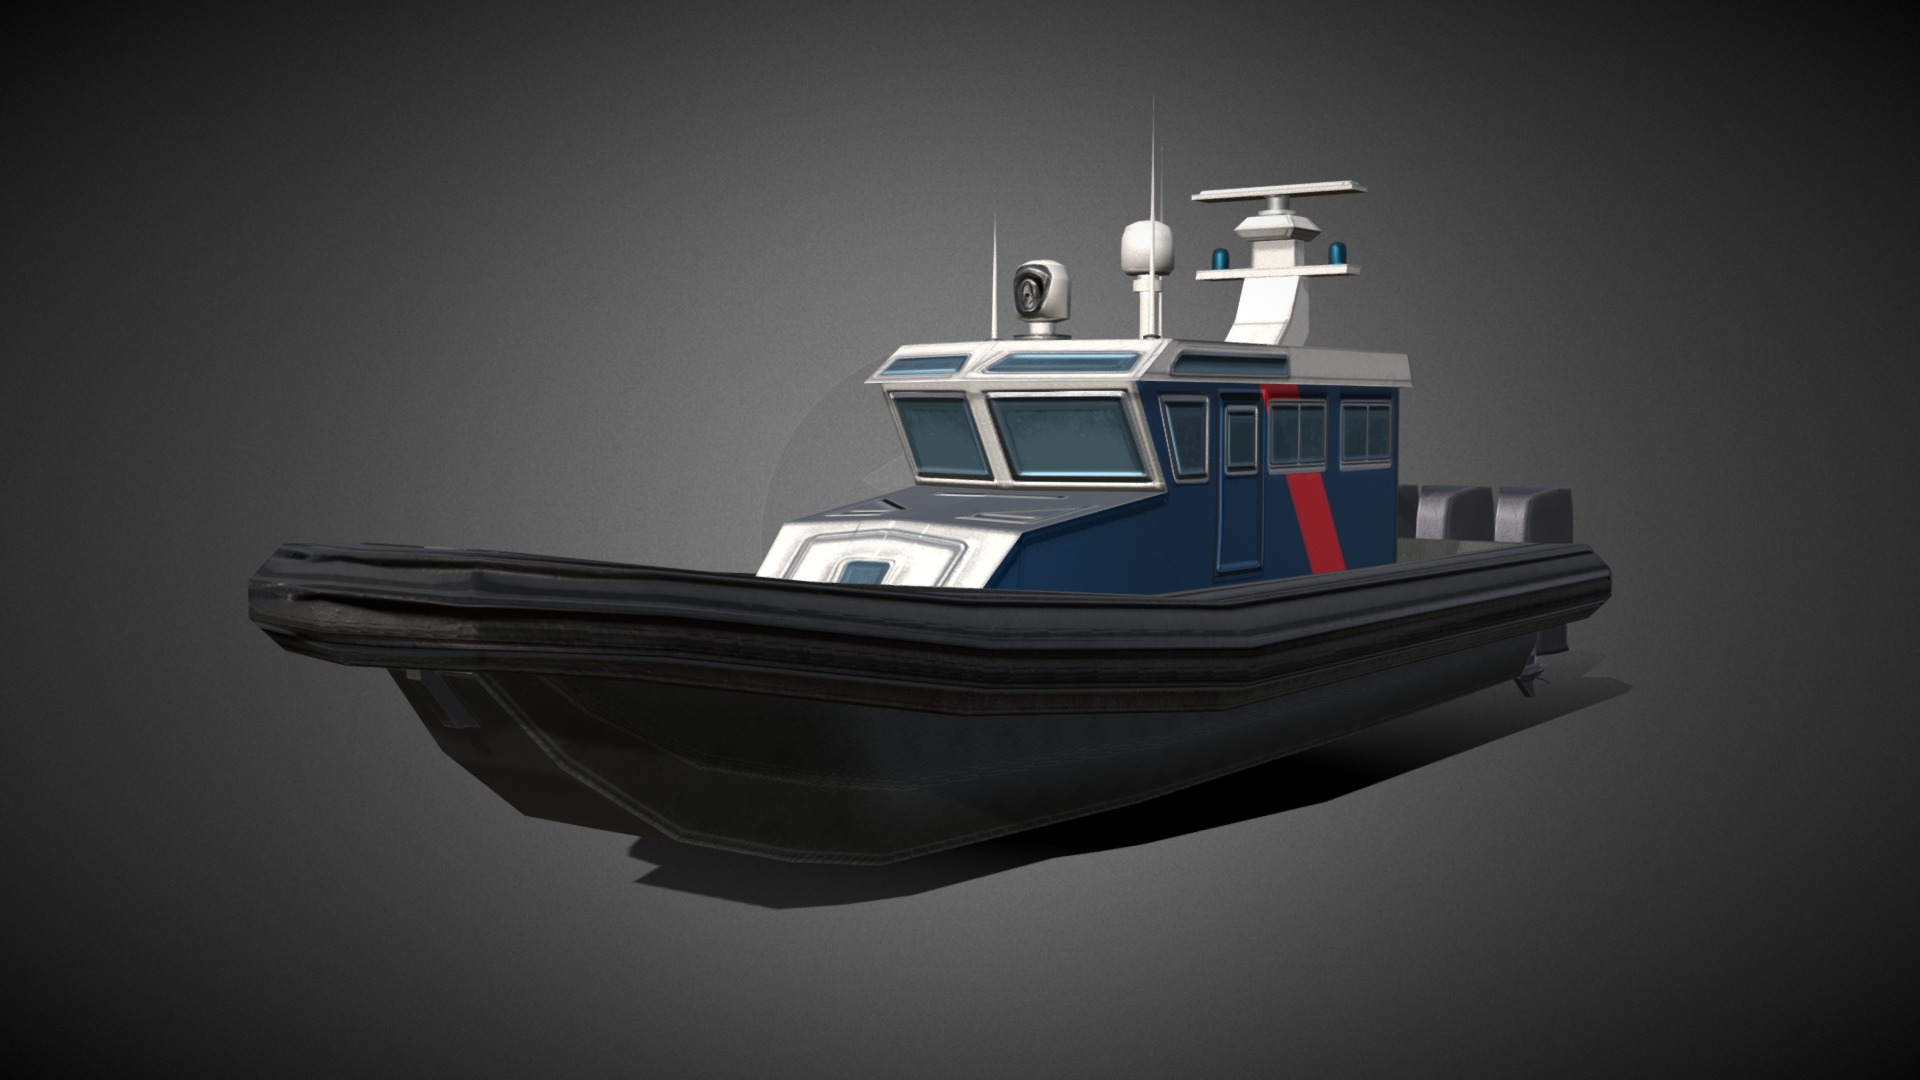 3D model Fast Response Boat - This is a 3D model of the Fast Response Boat. The 3D model is about a small boat on a black surface.